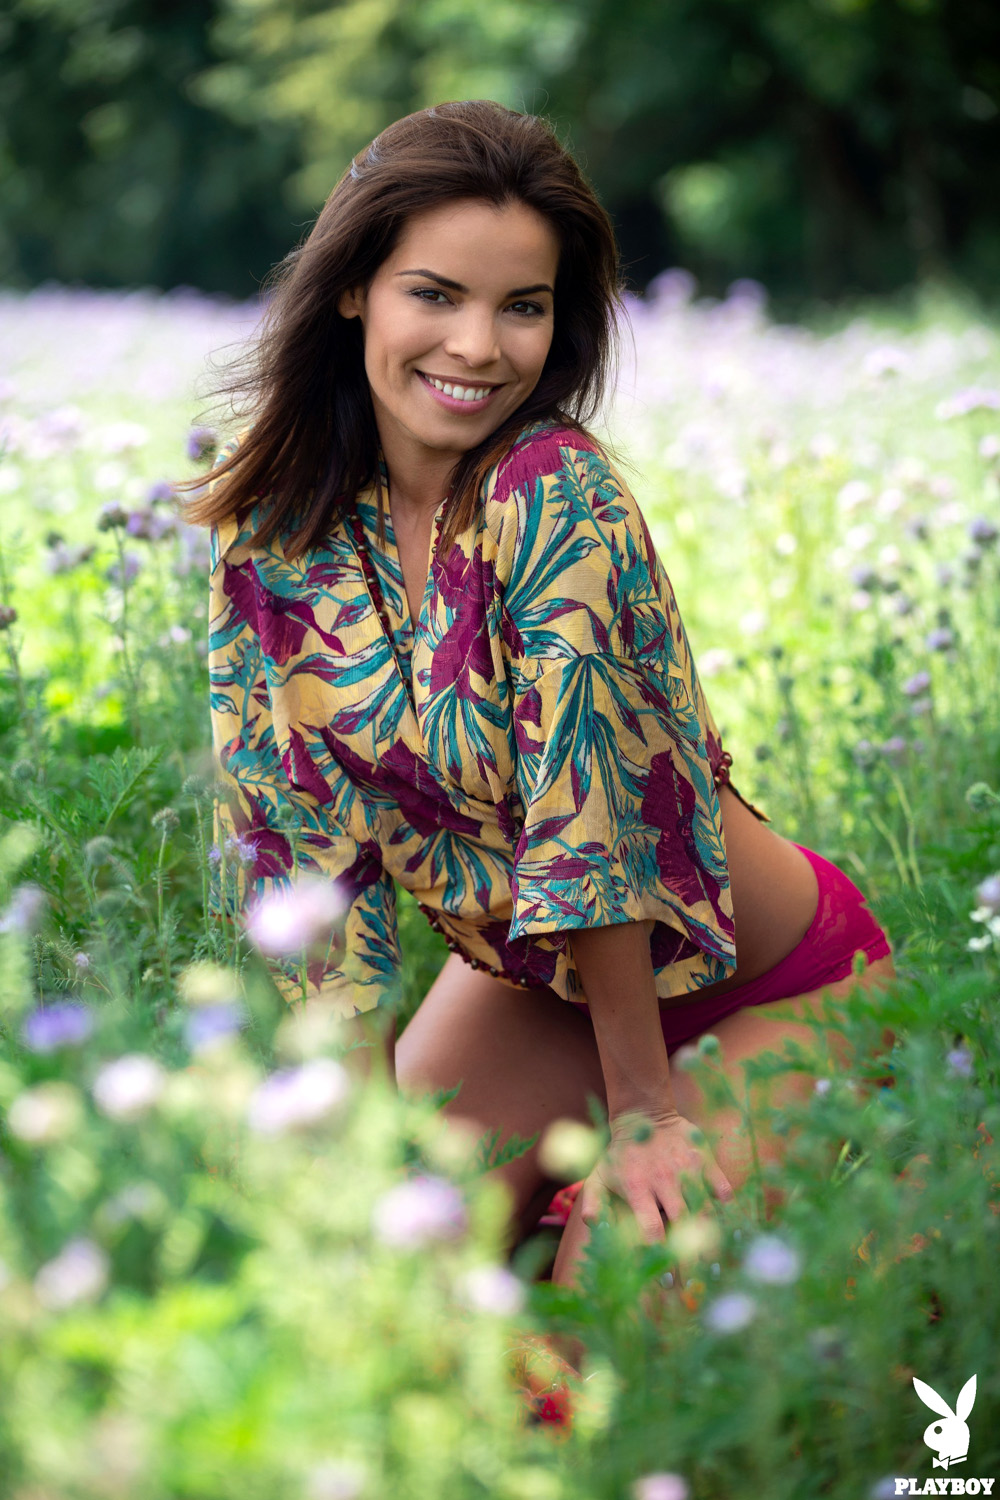 Natalie Costello exposes her perfect curves in a field of purple flowers